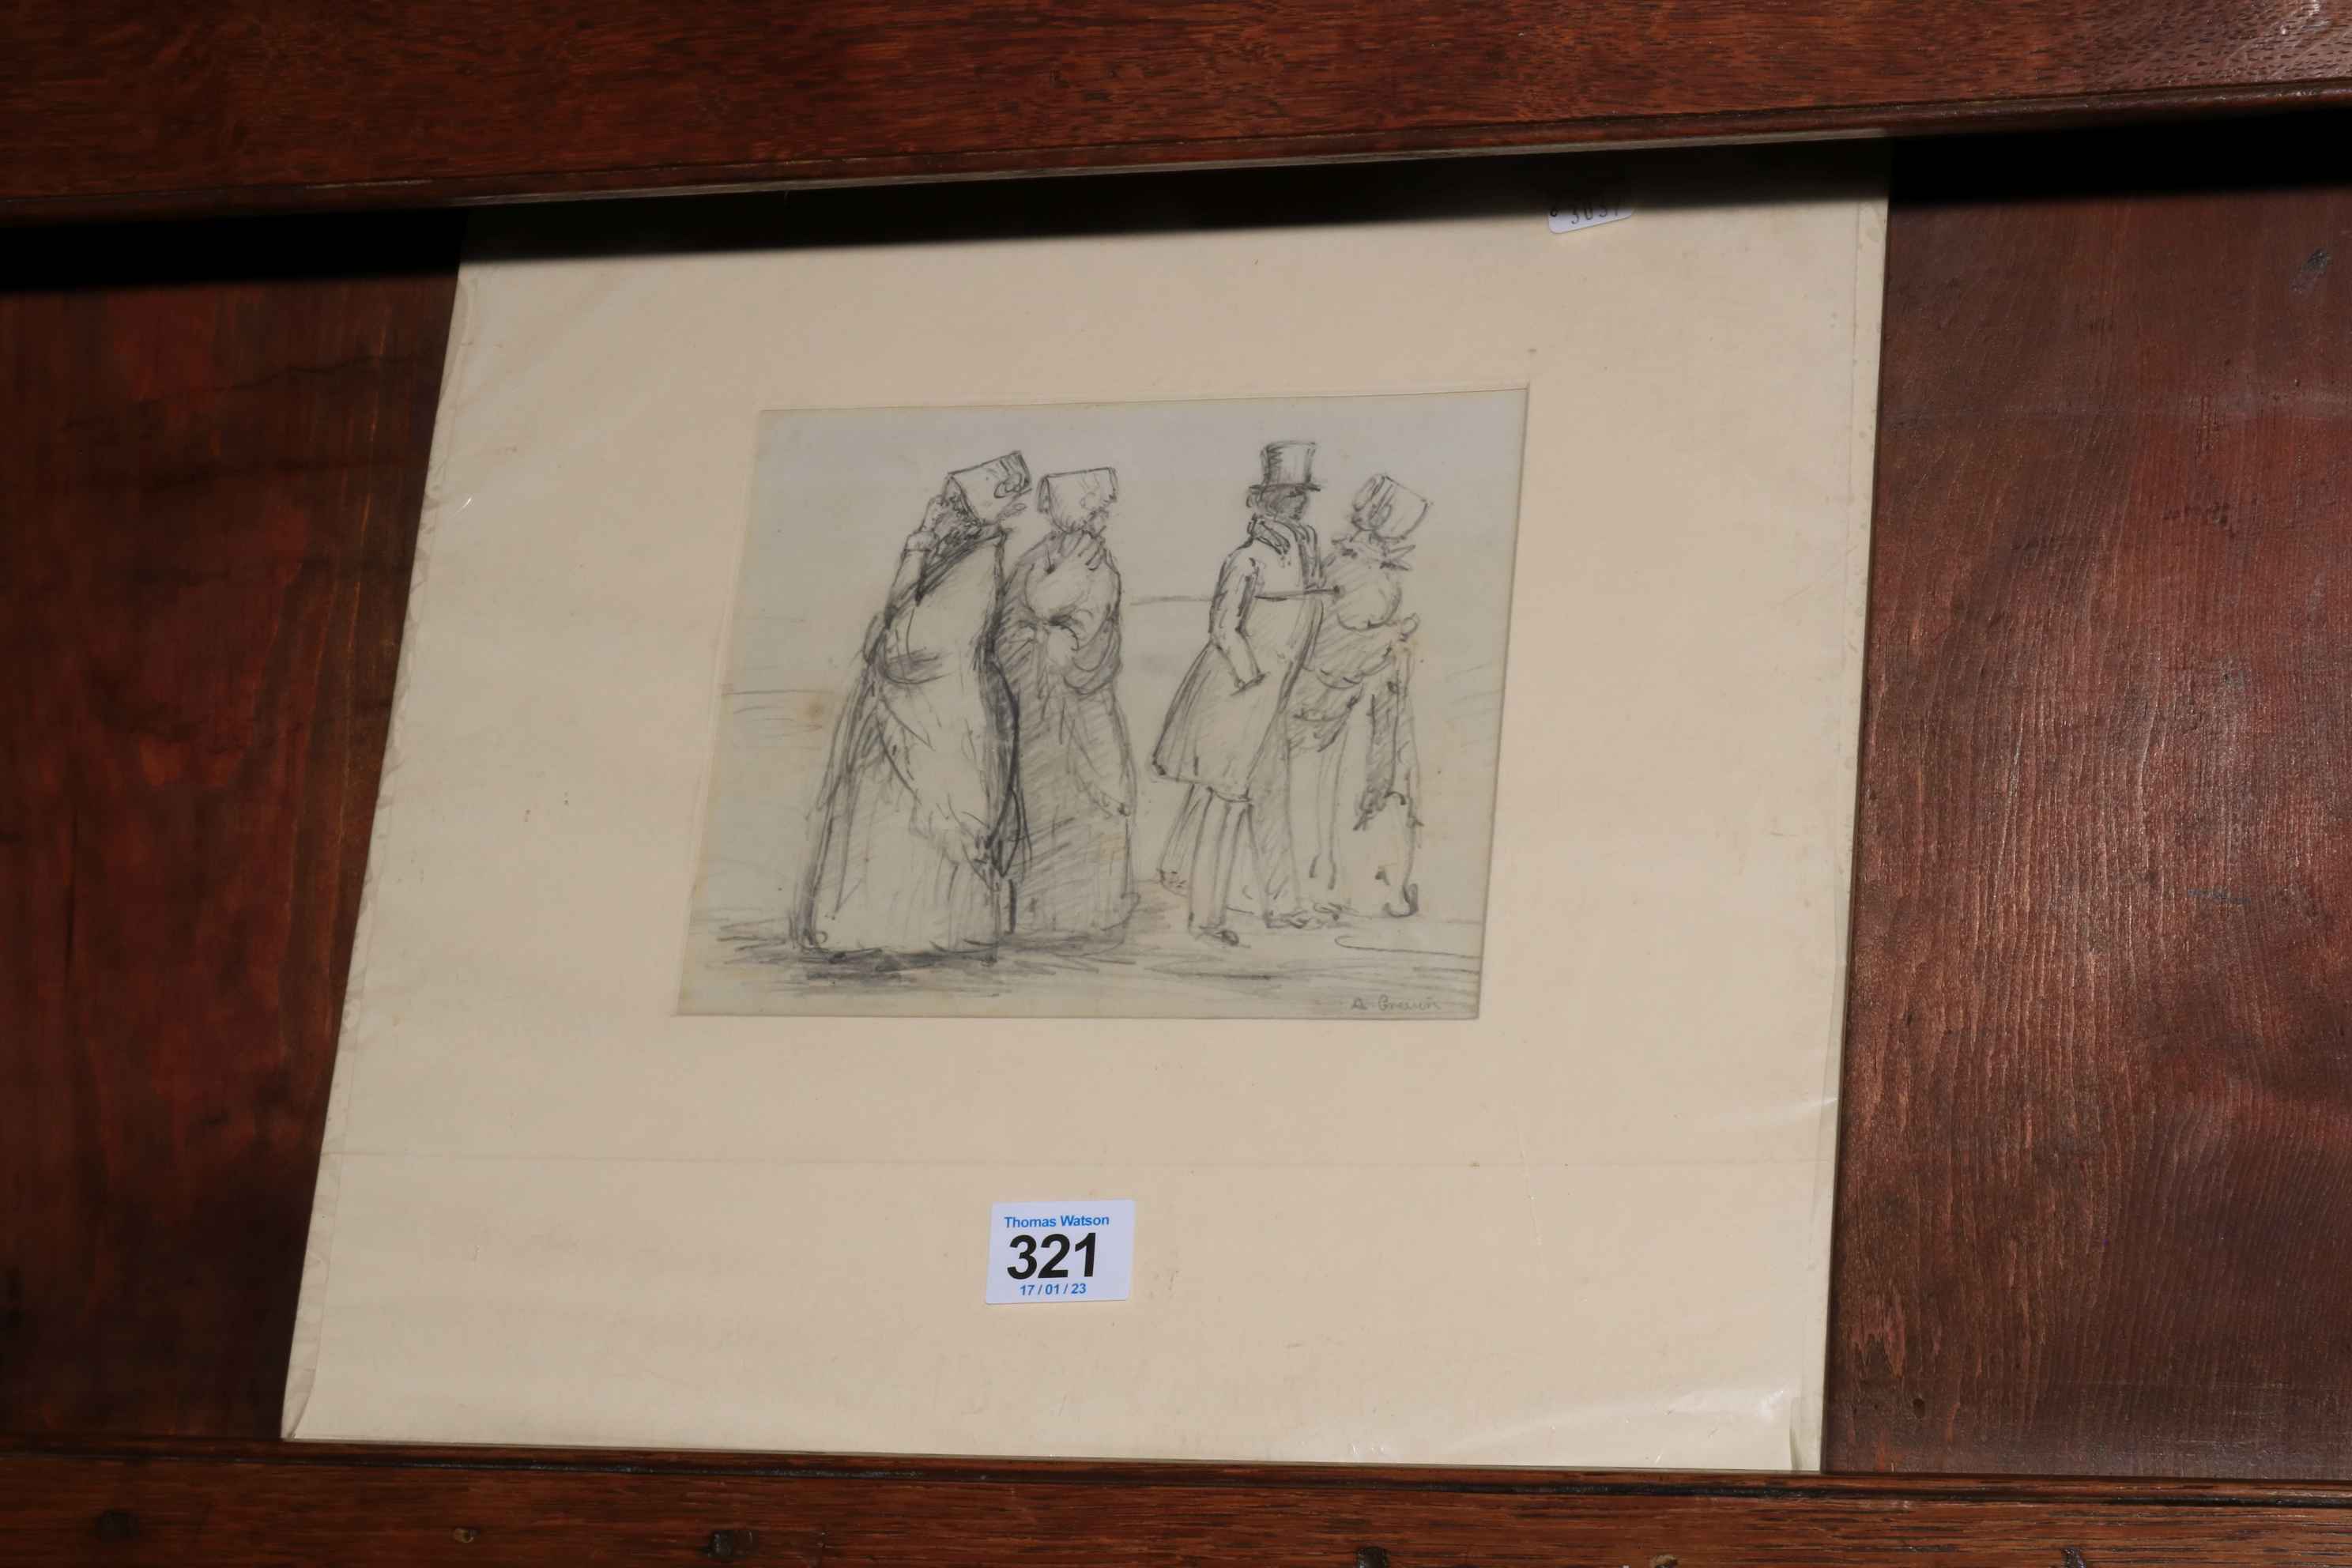 A Grevin, four figures, French pencil on paper, signed lower right, 14cm by 17.5cm, mounted.